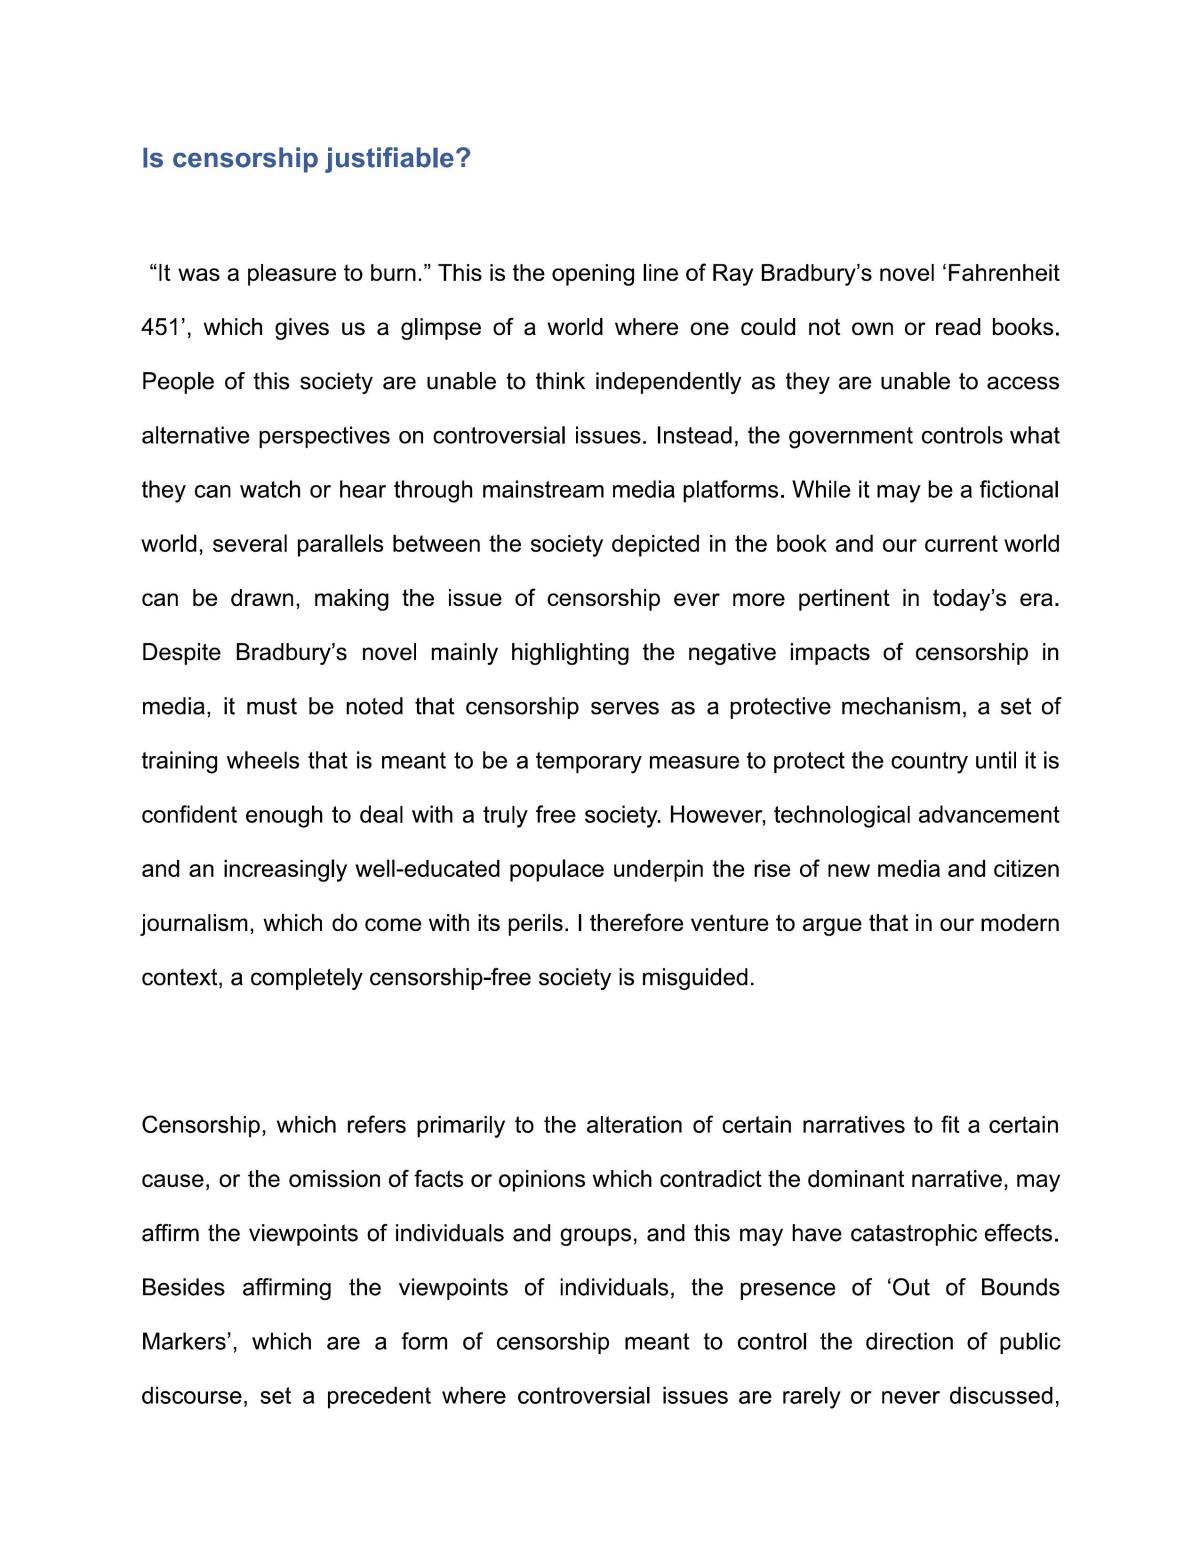 censorship research essay